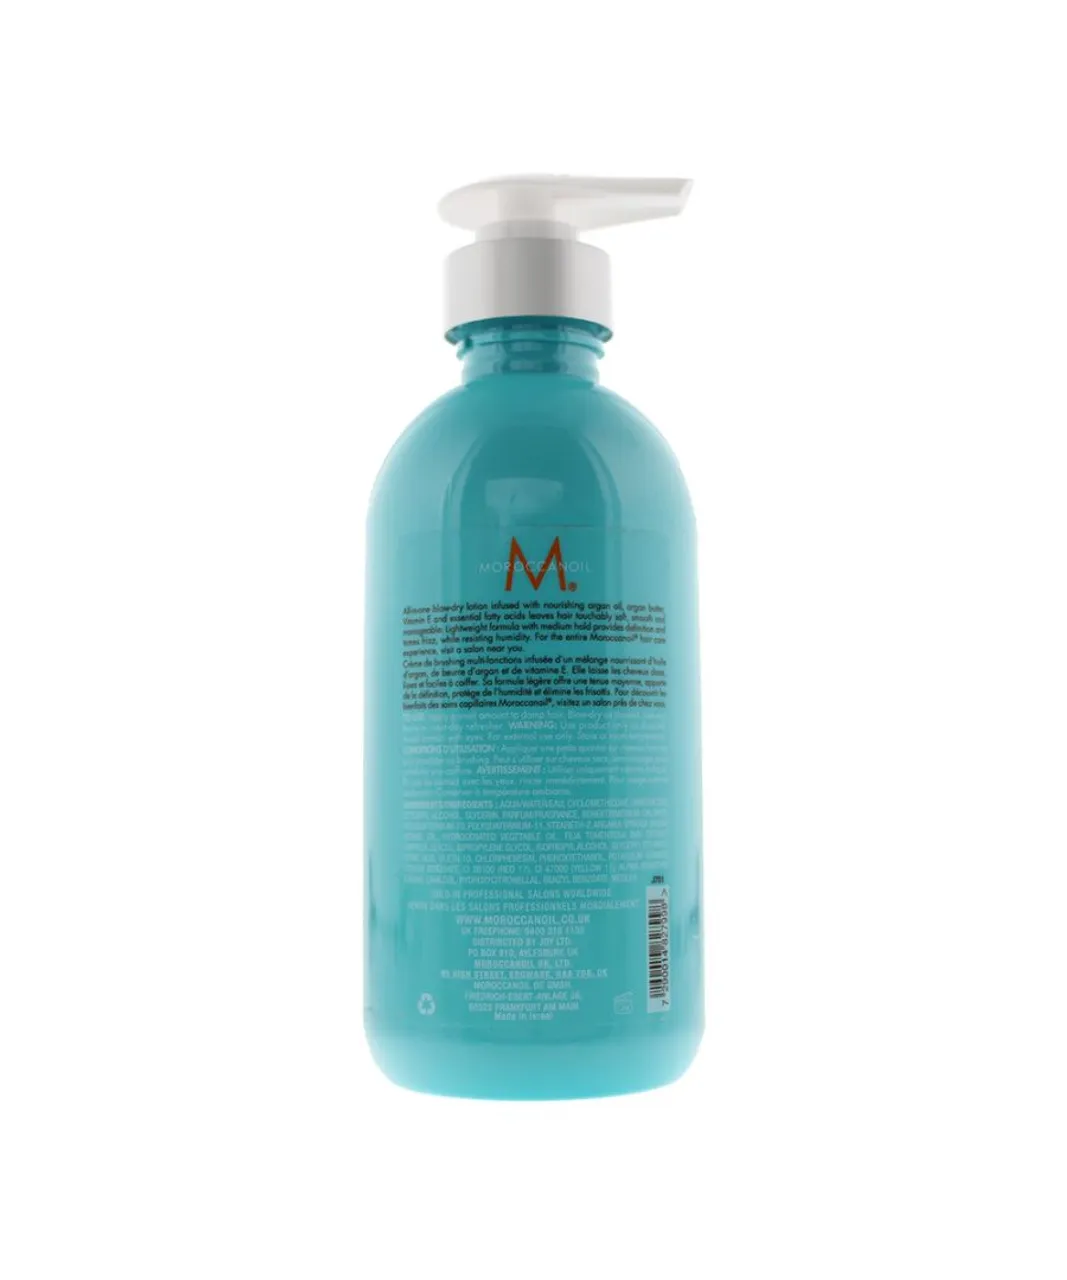 Moroccanoil Unisex Smooth Hair Lotion 300ml - NA - One Size